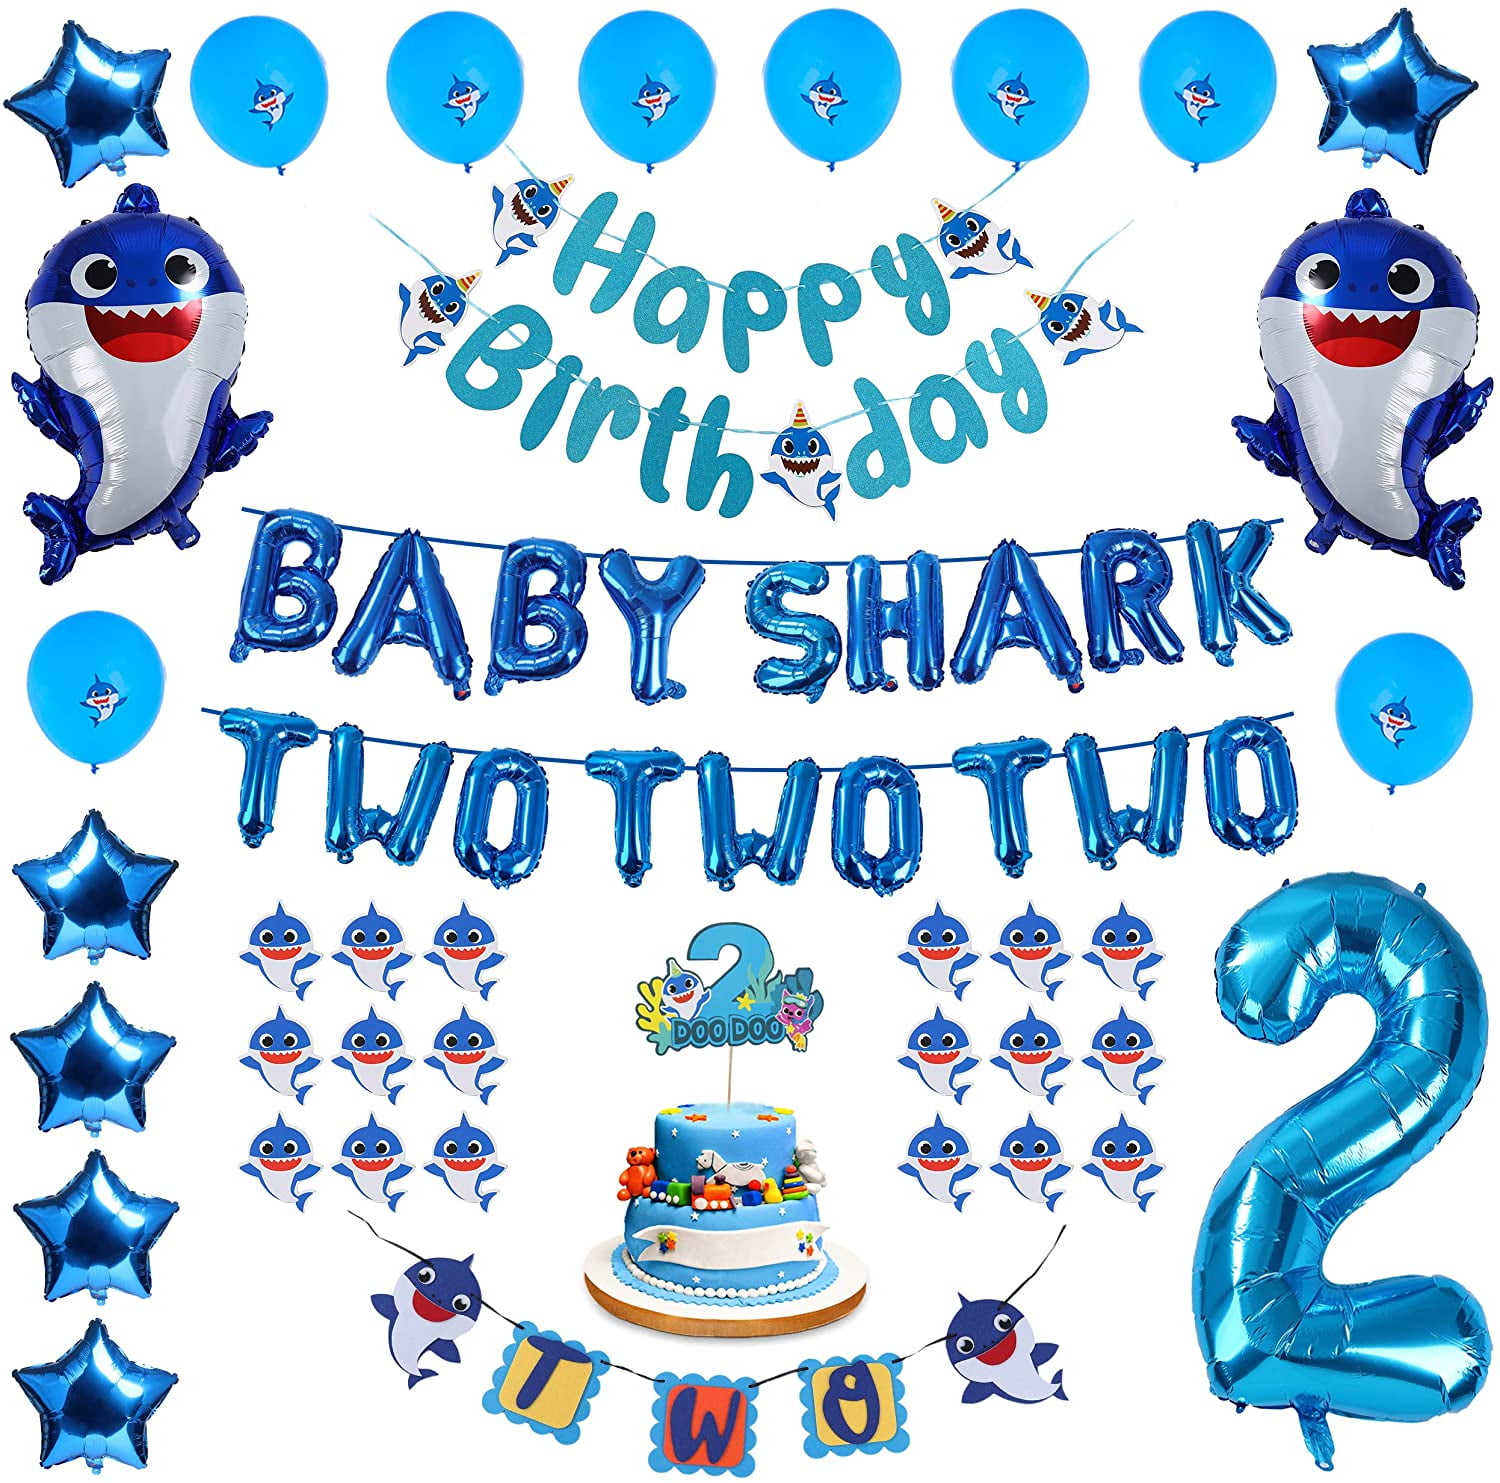 Little Shark Party Supplies Birthday Decorations Party Swirl Decorations Doo Doo Shark Banner and Cupcake Topper Shark Family Party Supplies for Kids Birthday Party 